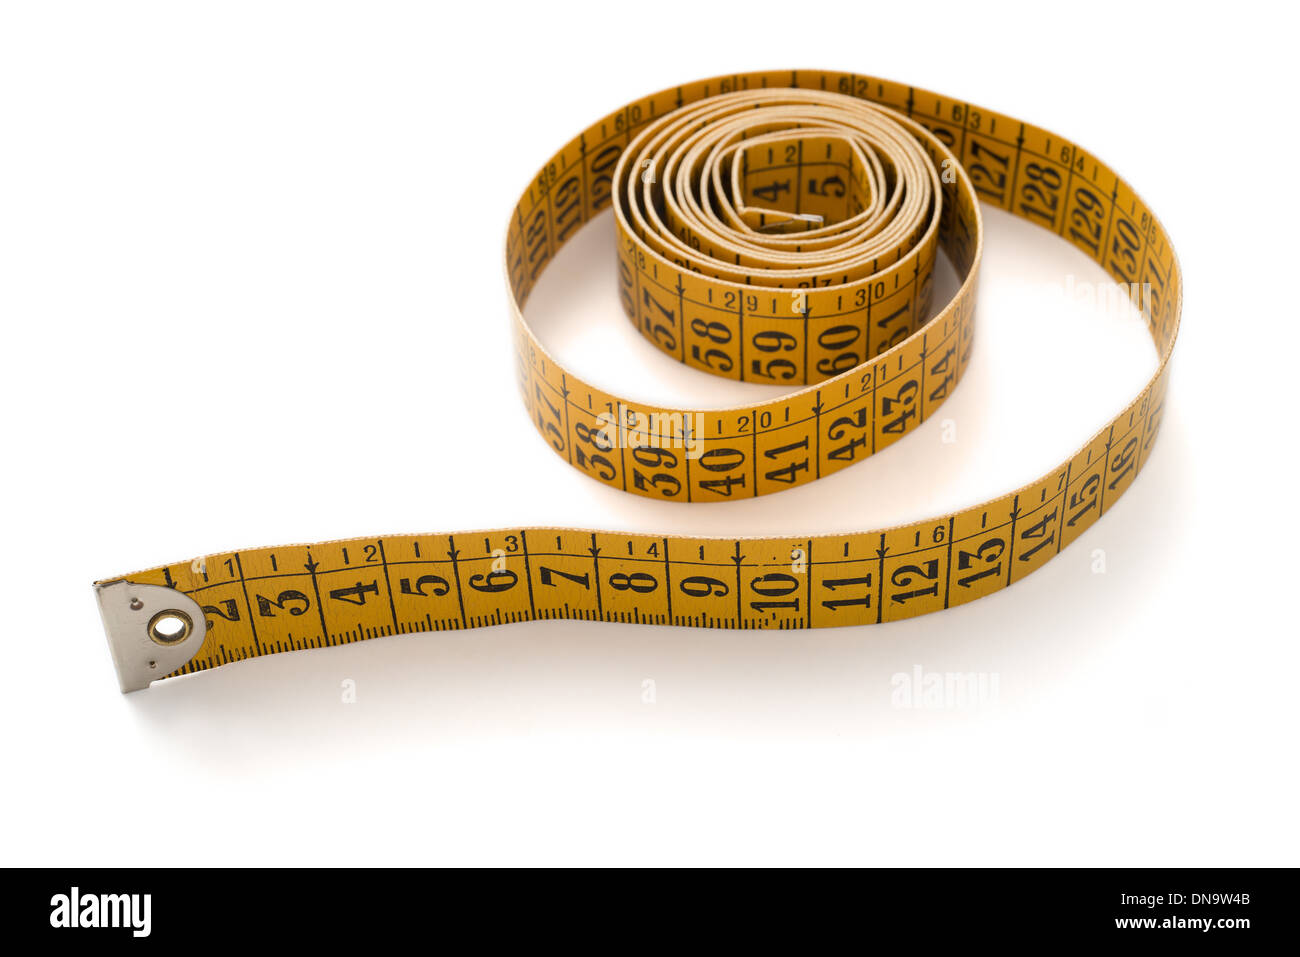 Paper Tape Measure Stock Photo - Download Image Now - Ikea, Accuracy,  Centimeter - iStock